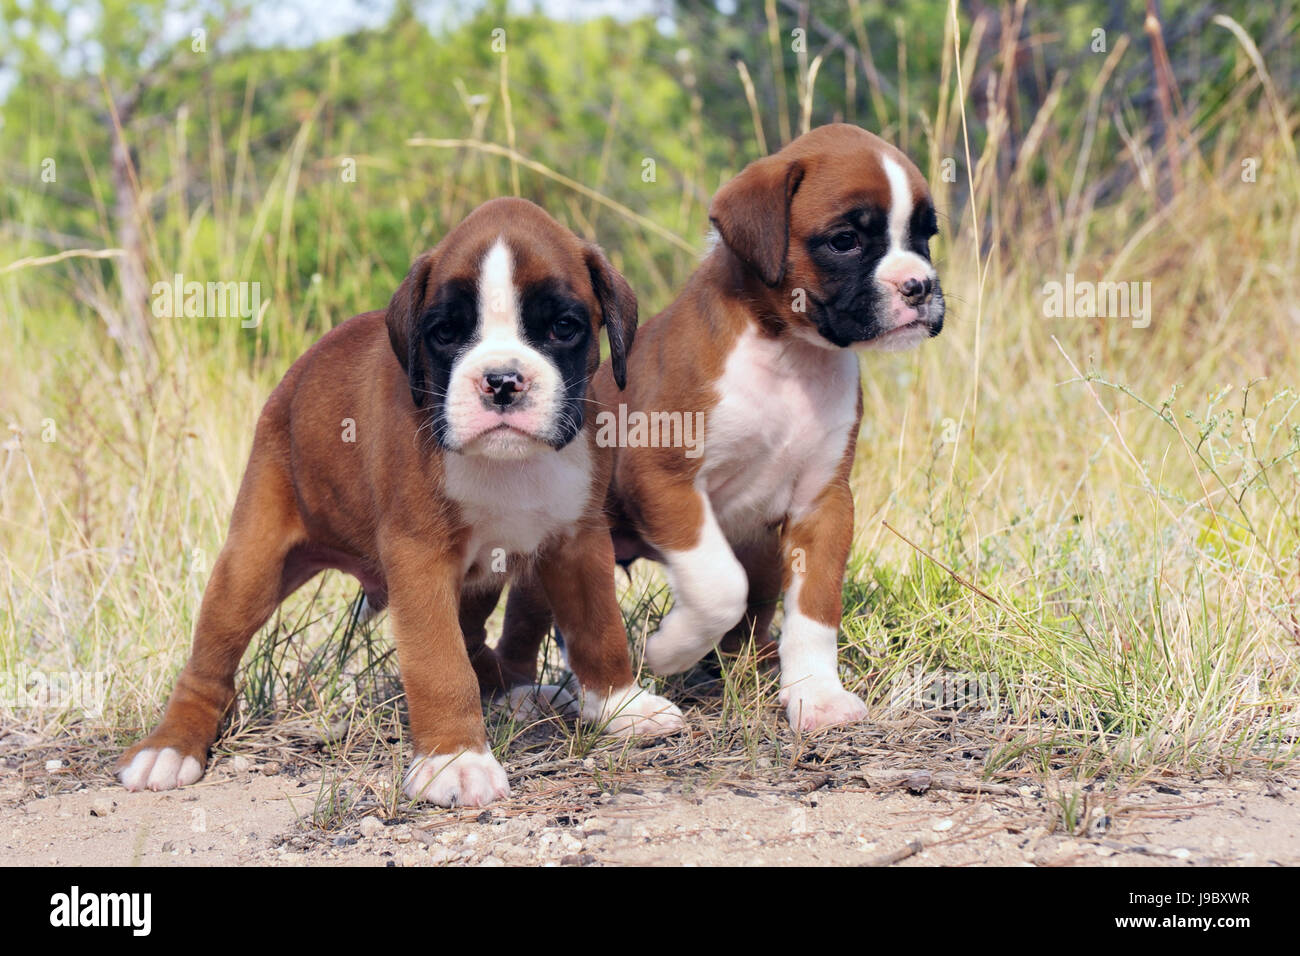 pet, dog, dogs, puppy, boxer, puppies, two, whelps, pupies, brown, brownish, Stock Photo